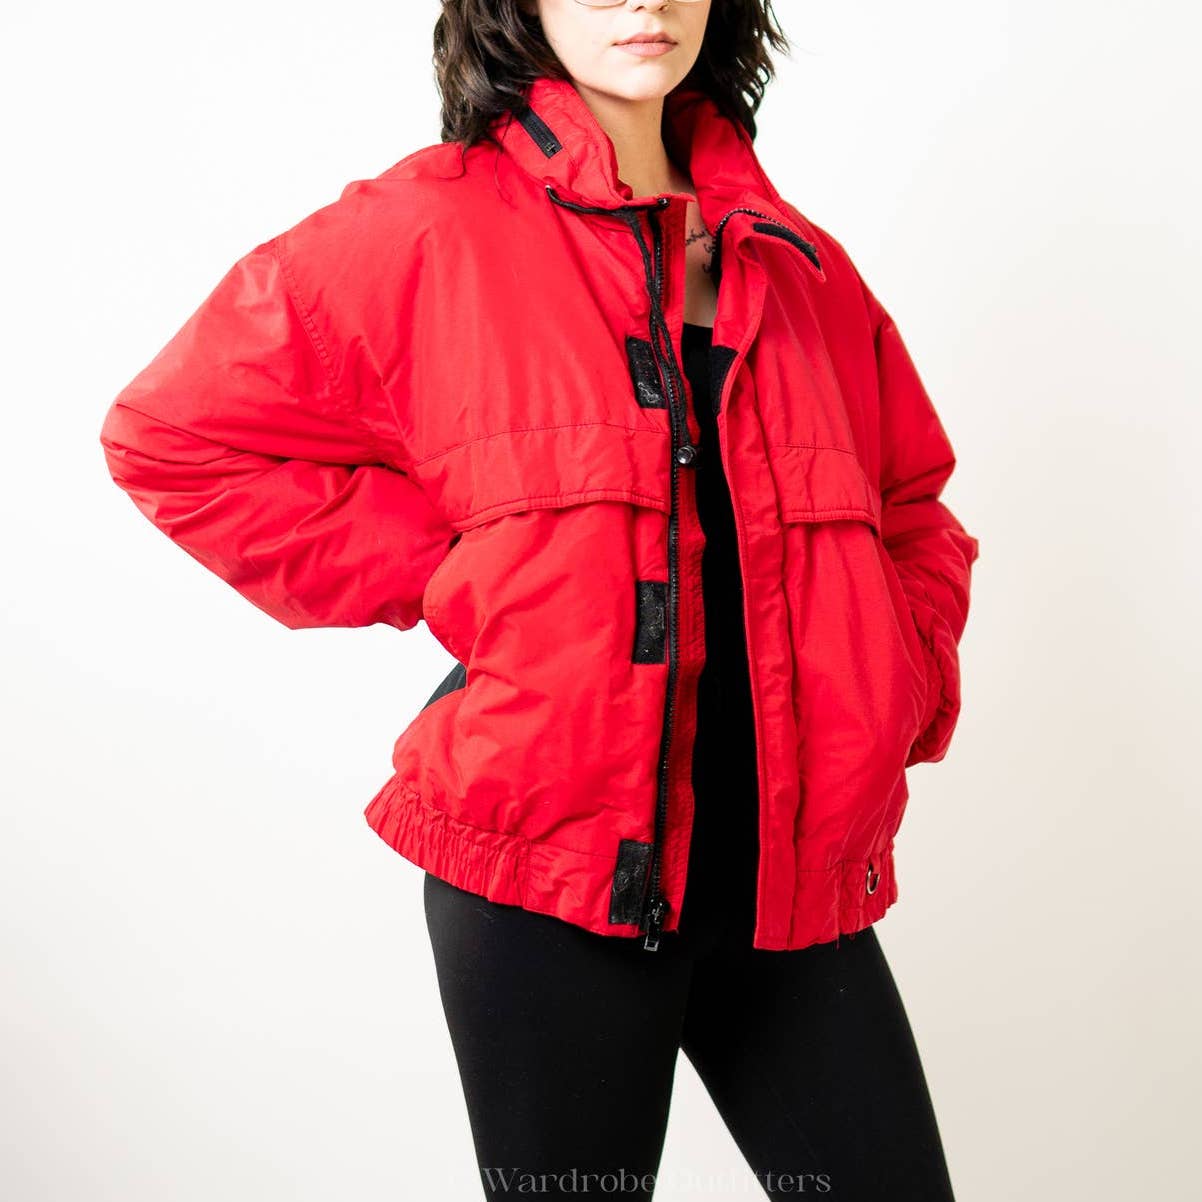 Vintage 90s Red Puffer Ski Jacket by [St. Moritz] - XL